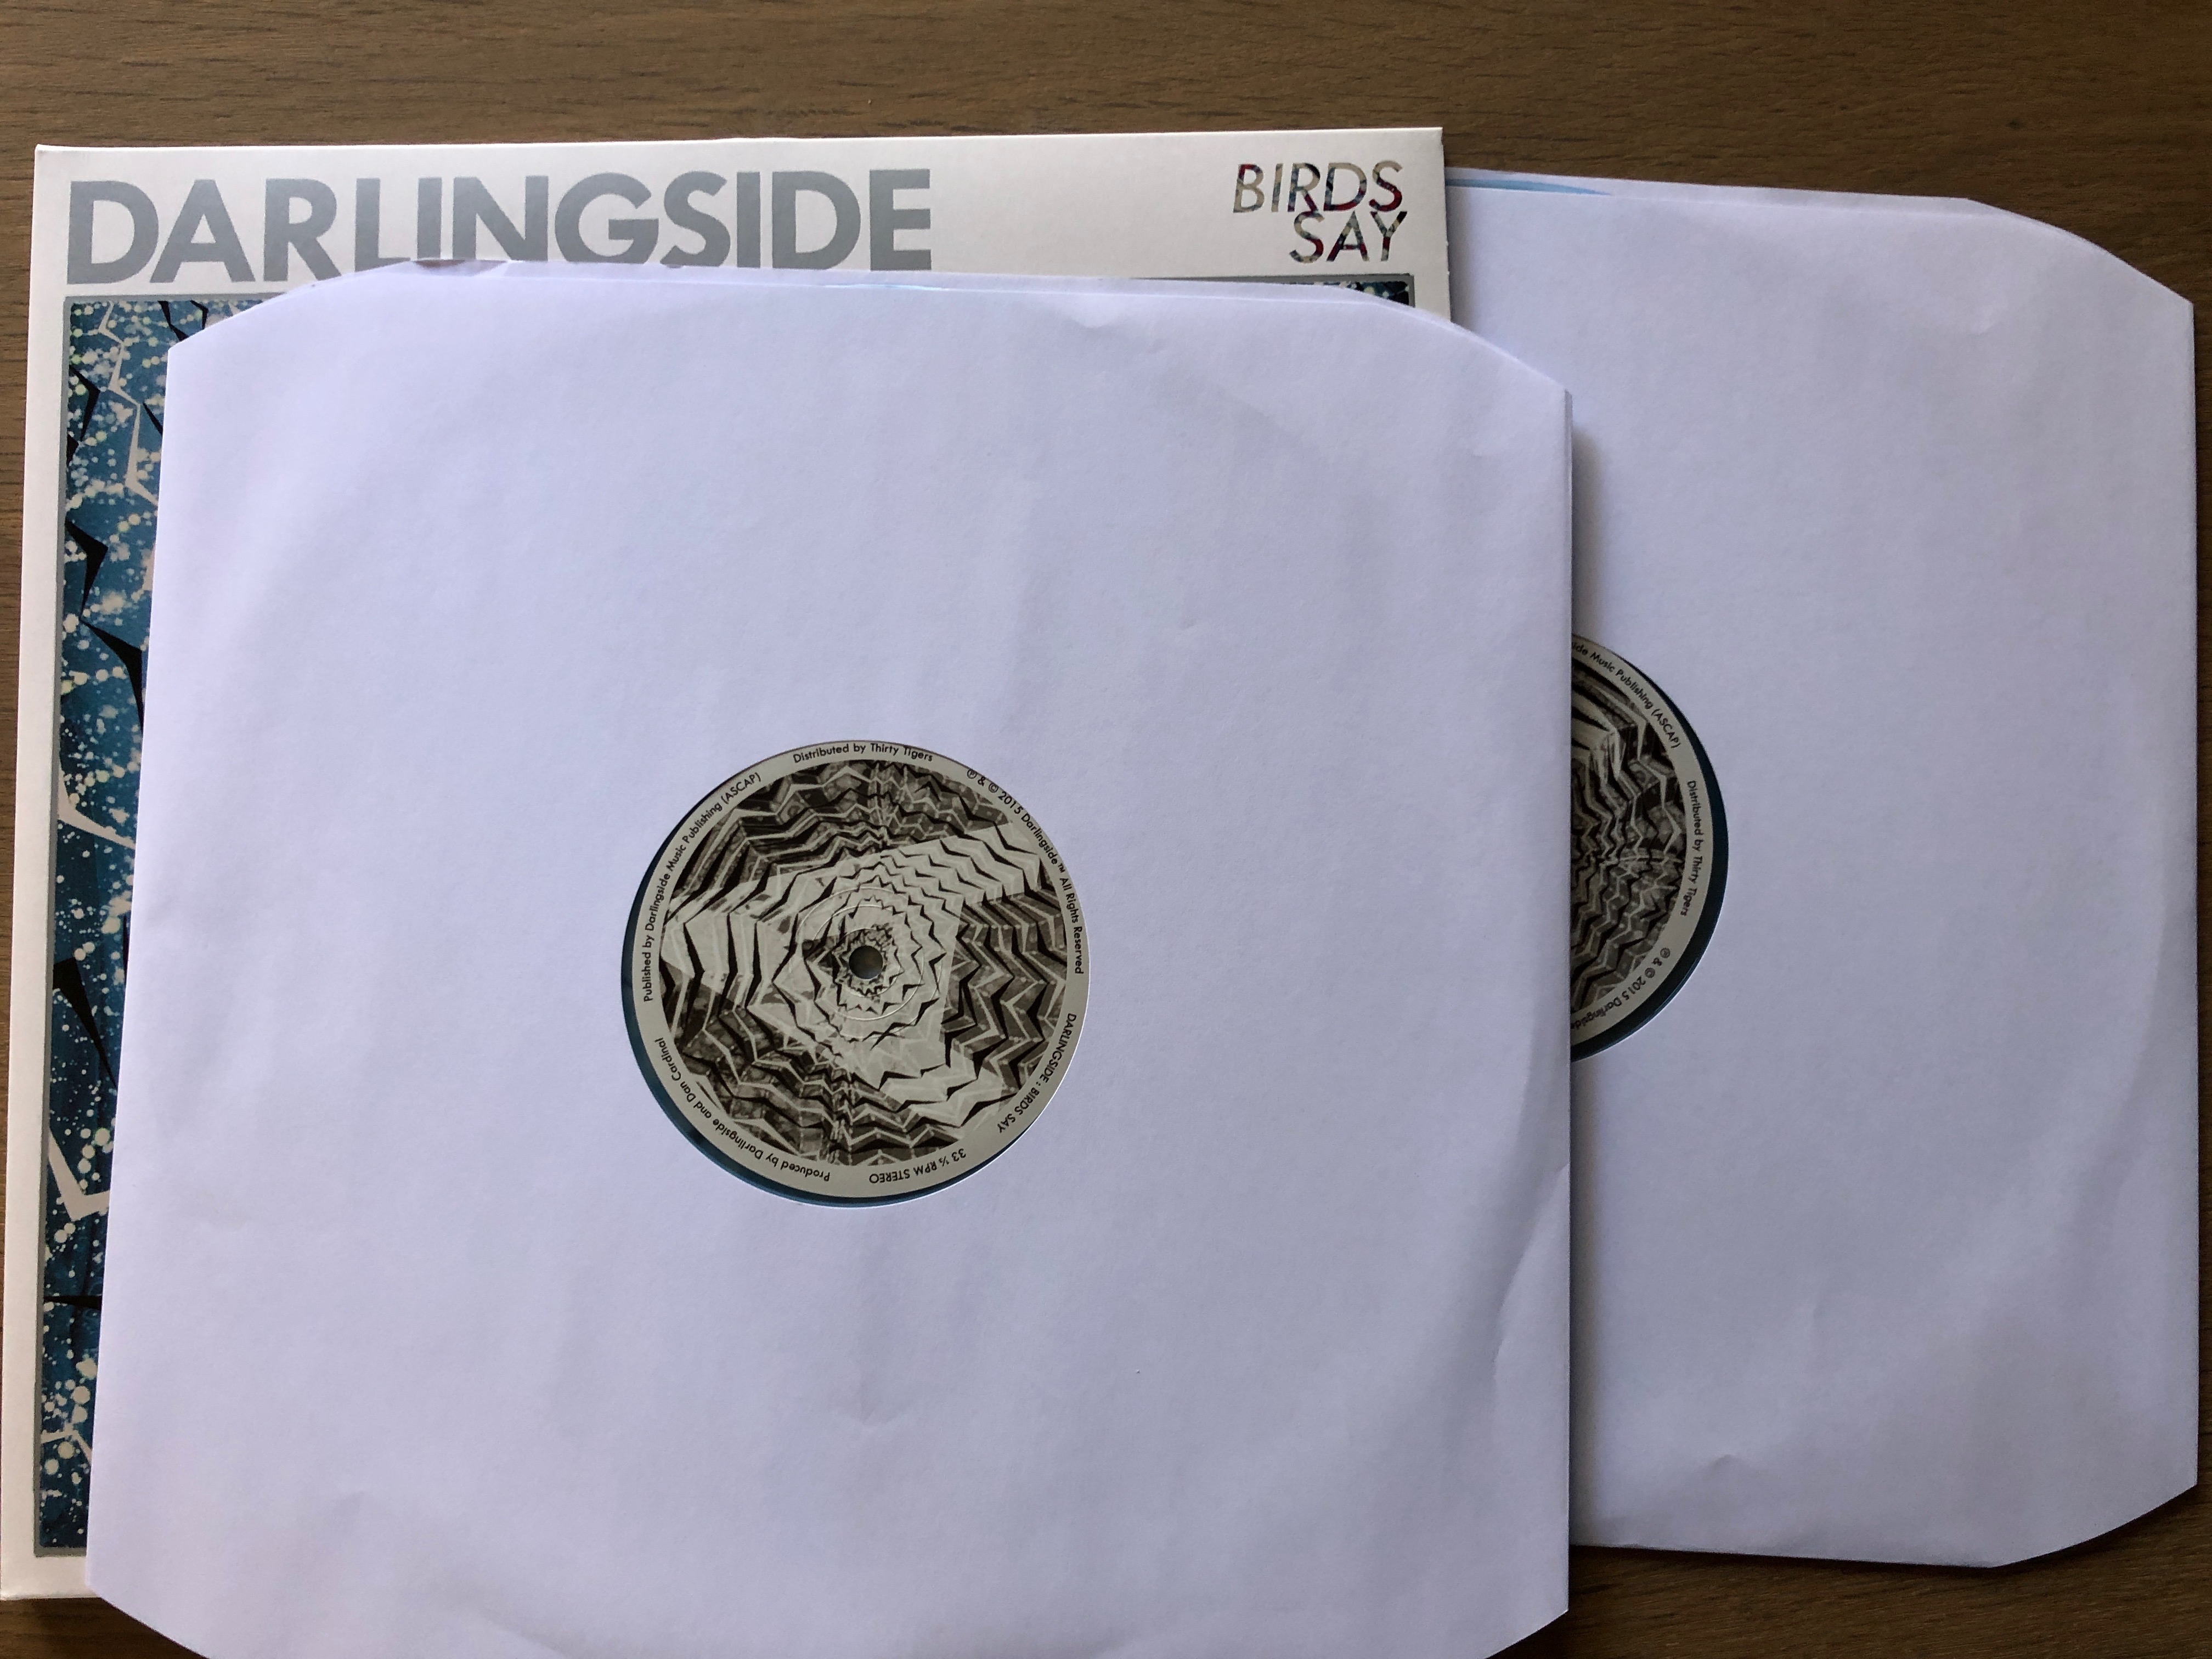 Photo of the two vinyl records in sleeves and the Darlingside 'Birds Say' album cover. 